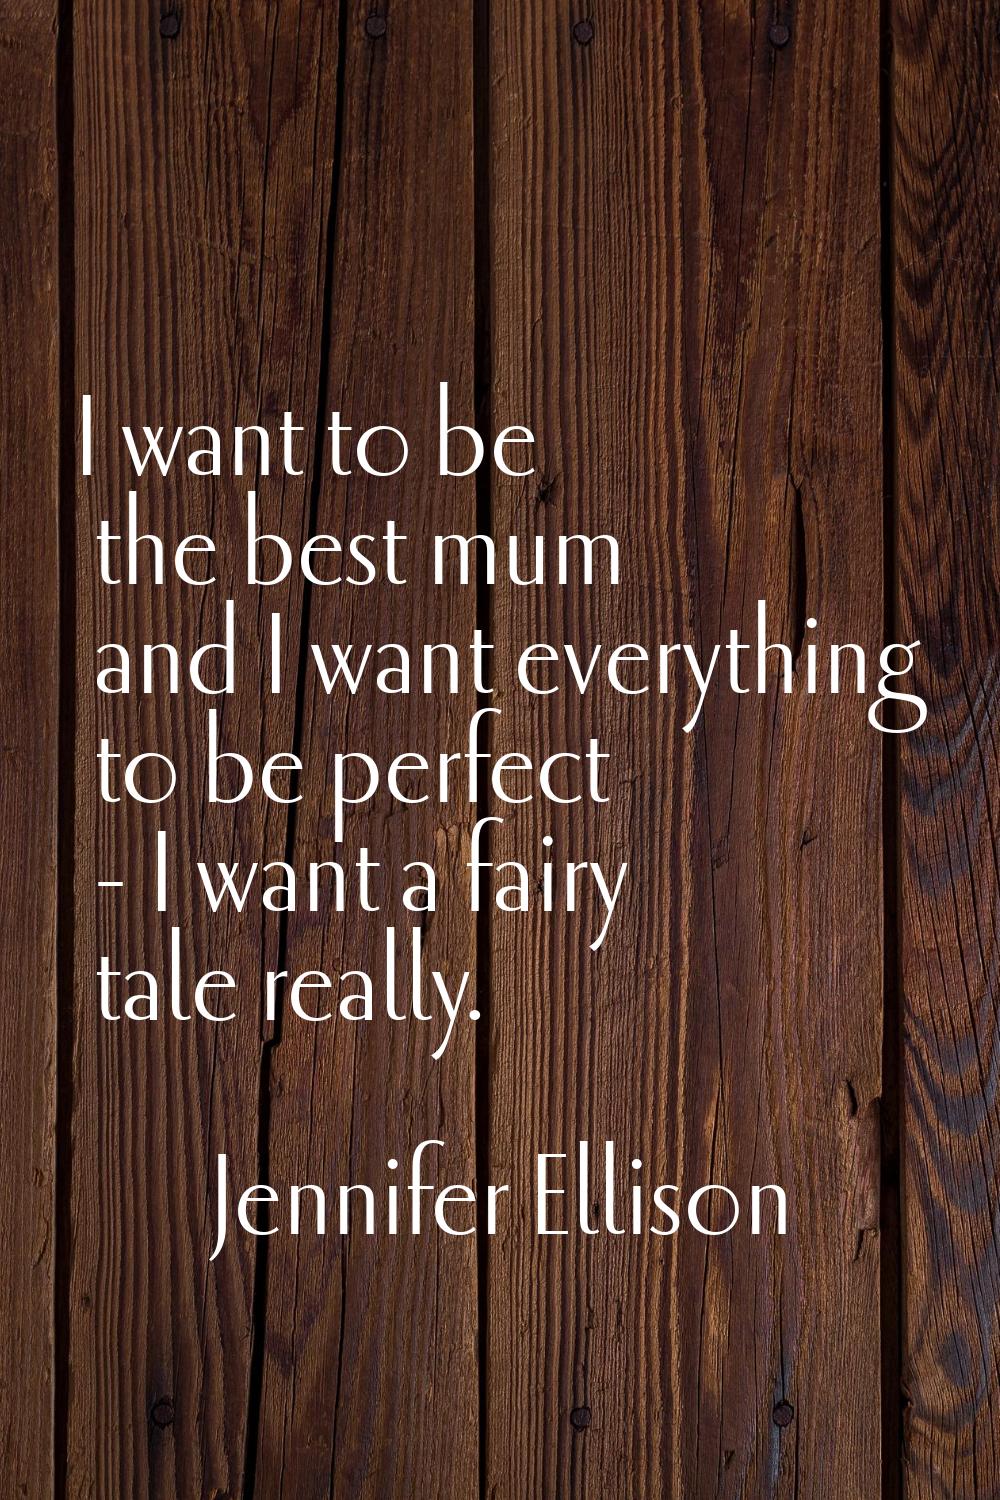 I want to be the best mum and I want everything to be perfect - I want a fairy tale really.